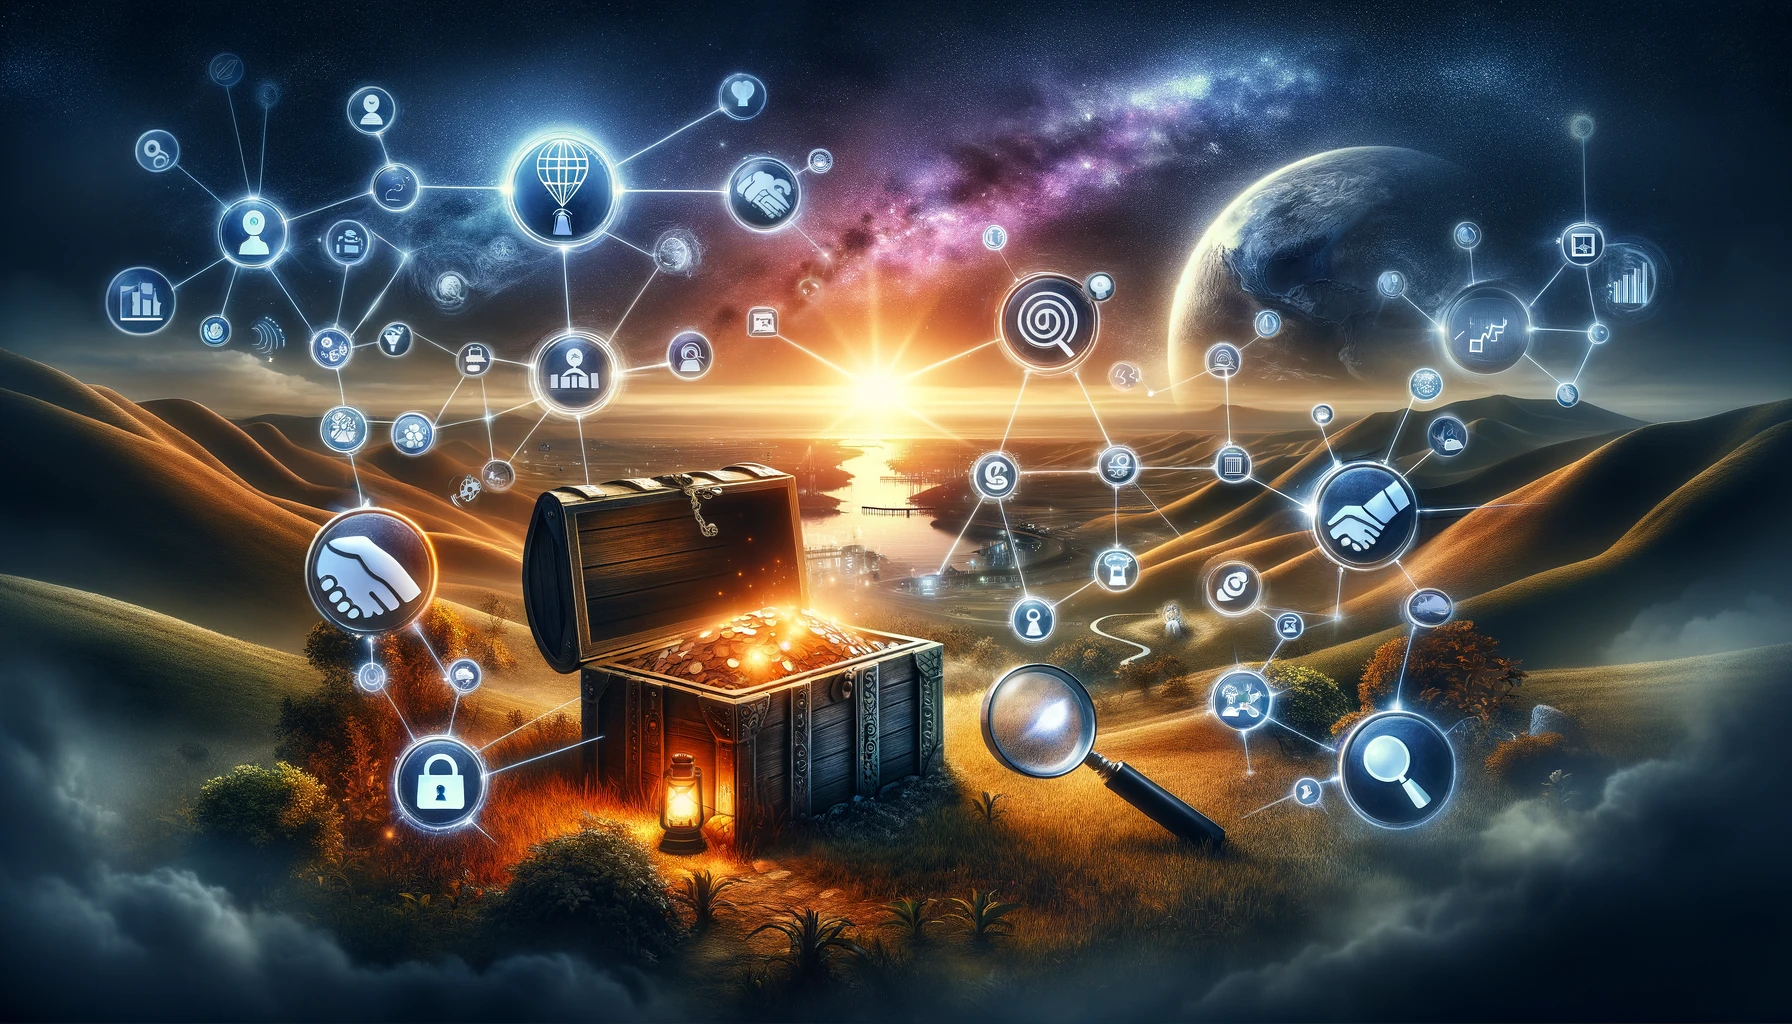 An imaginative depiction of off-page SEO secrets, featuring hidden treasure chests, handshakes, and magnifying glasses over social media icons set against a mysterious landscape.